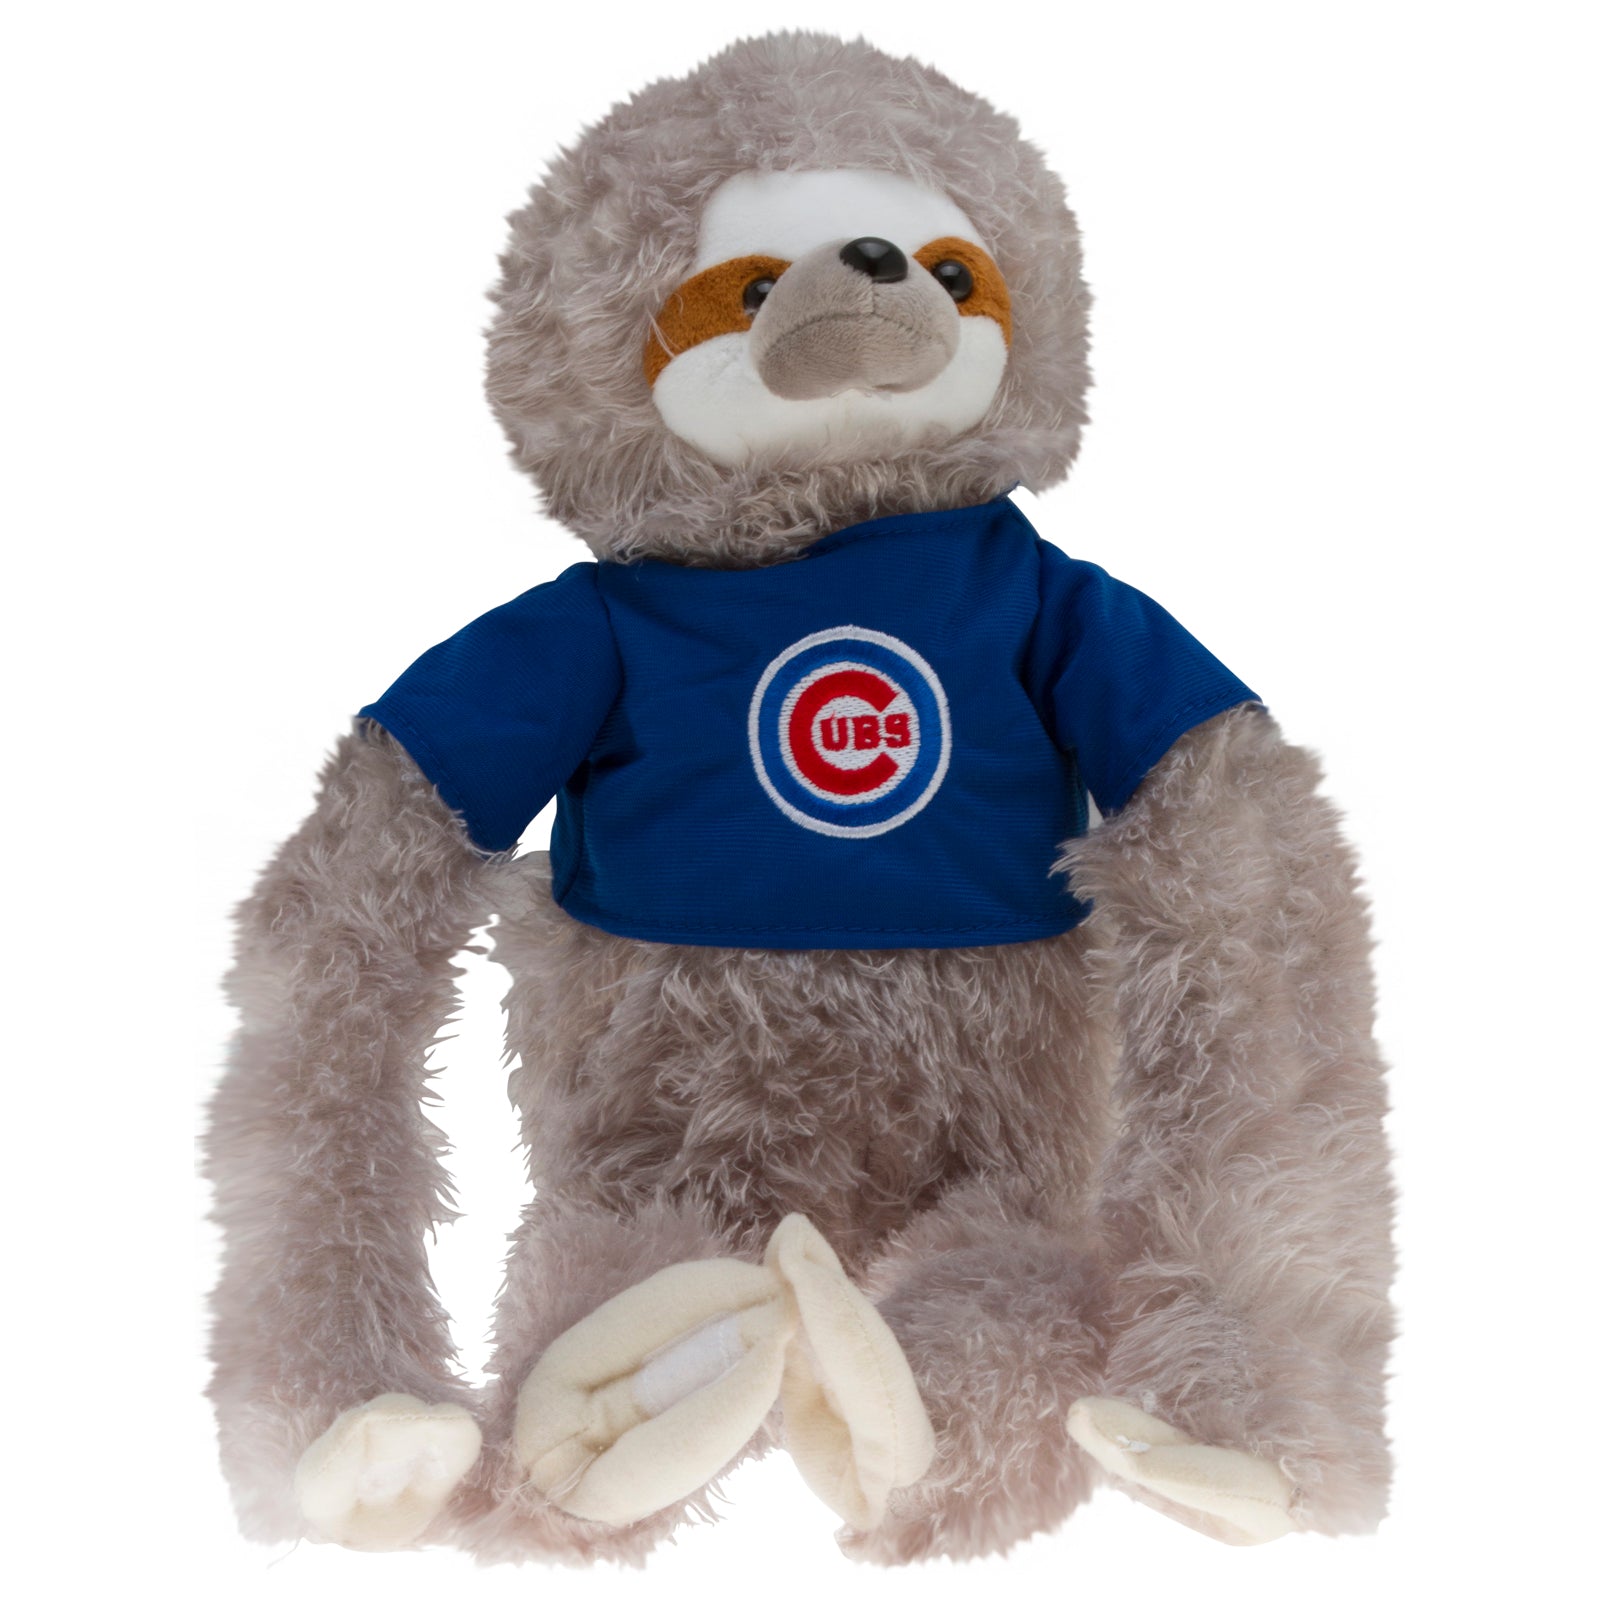 CubsCollection: Clark the Cub